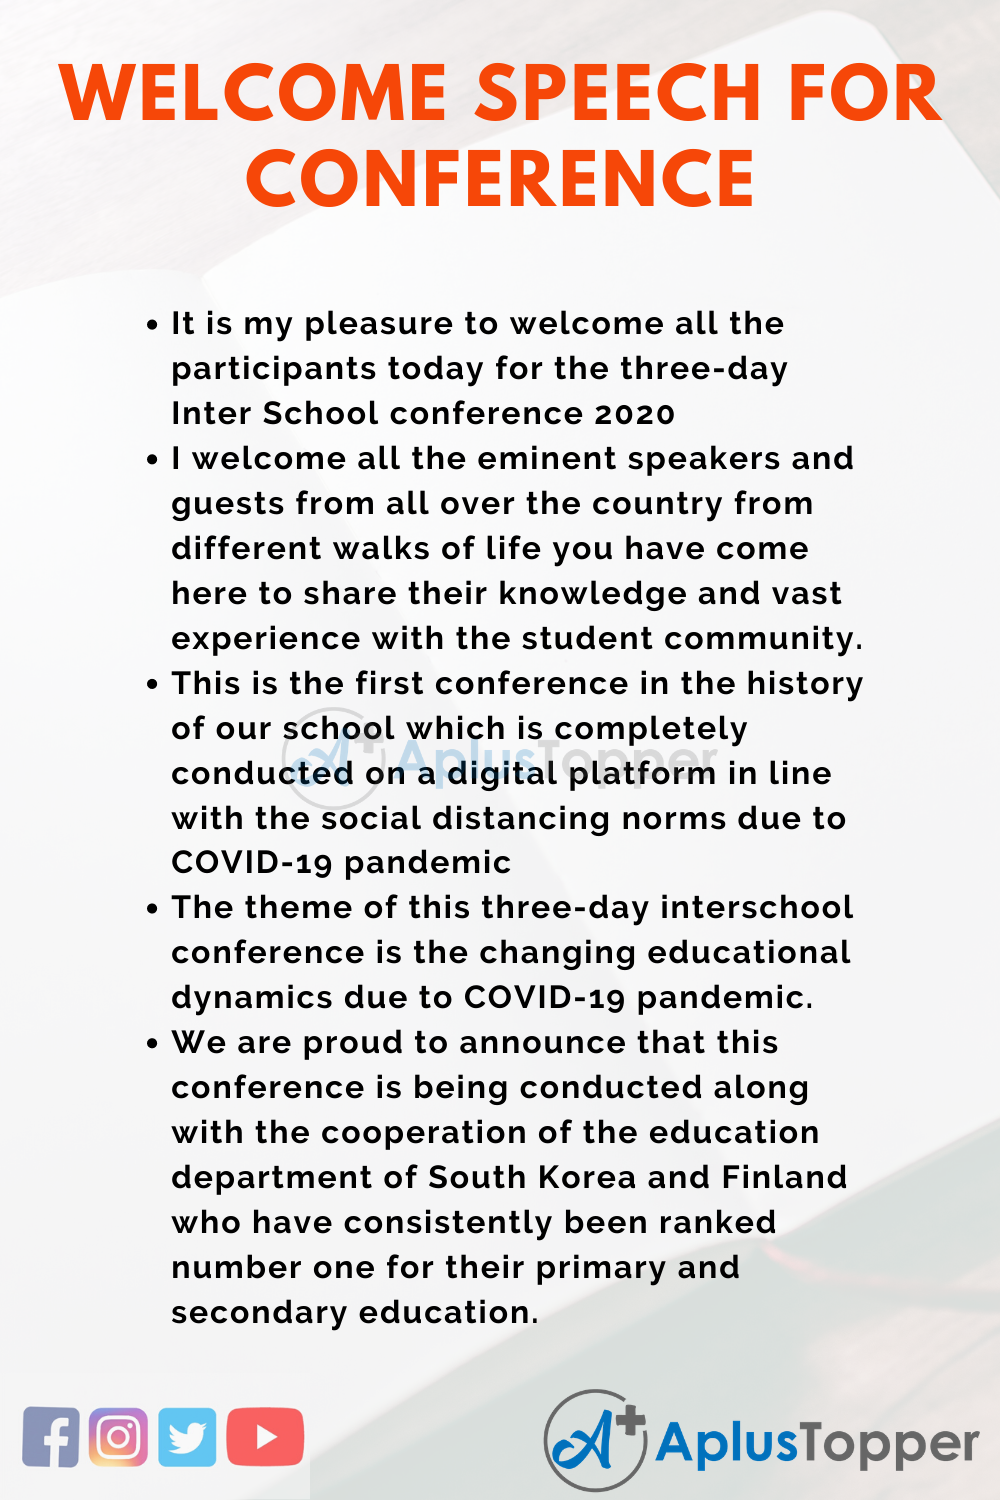 sample welcome speech for conference